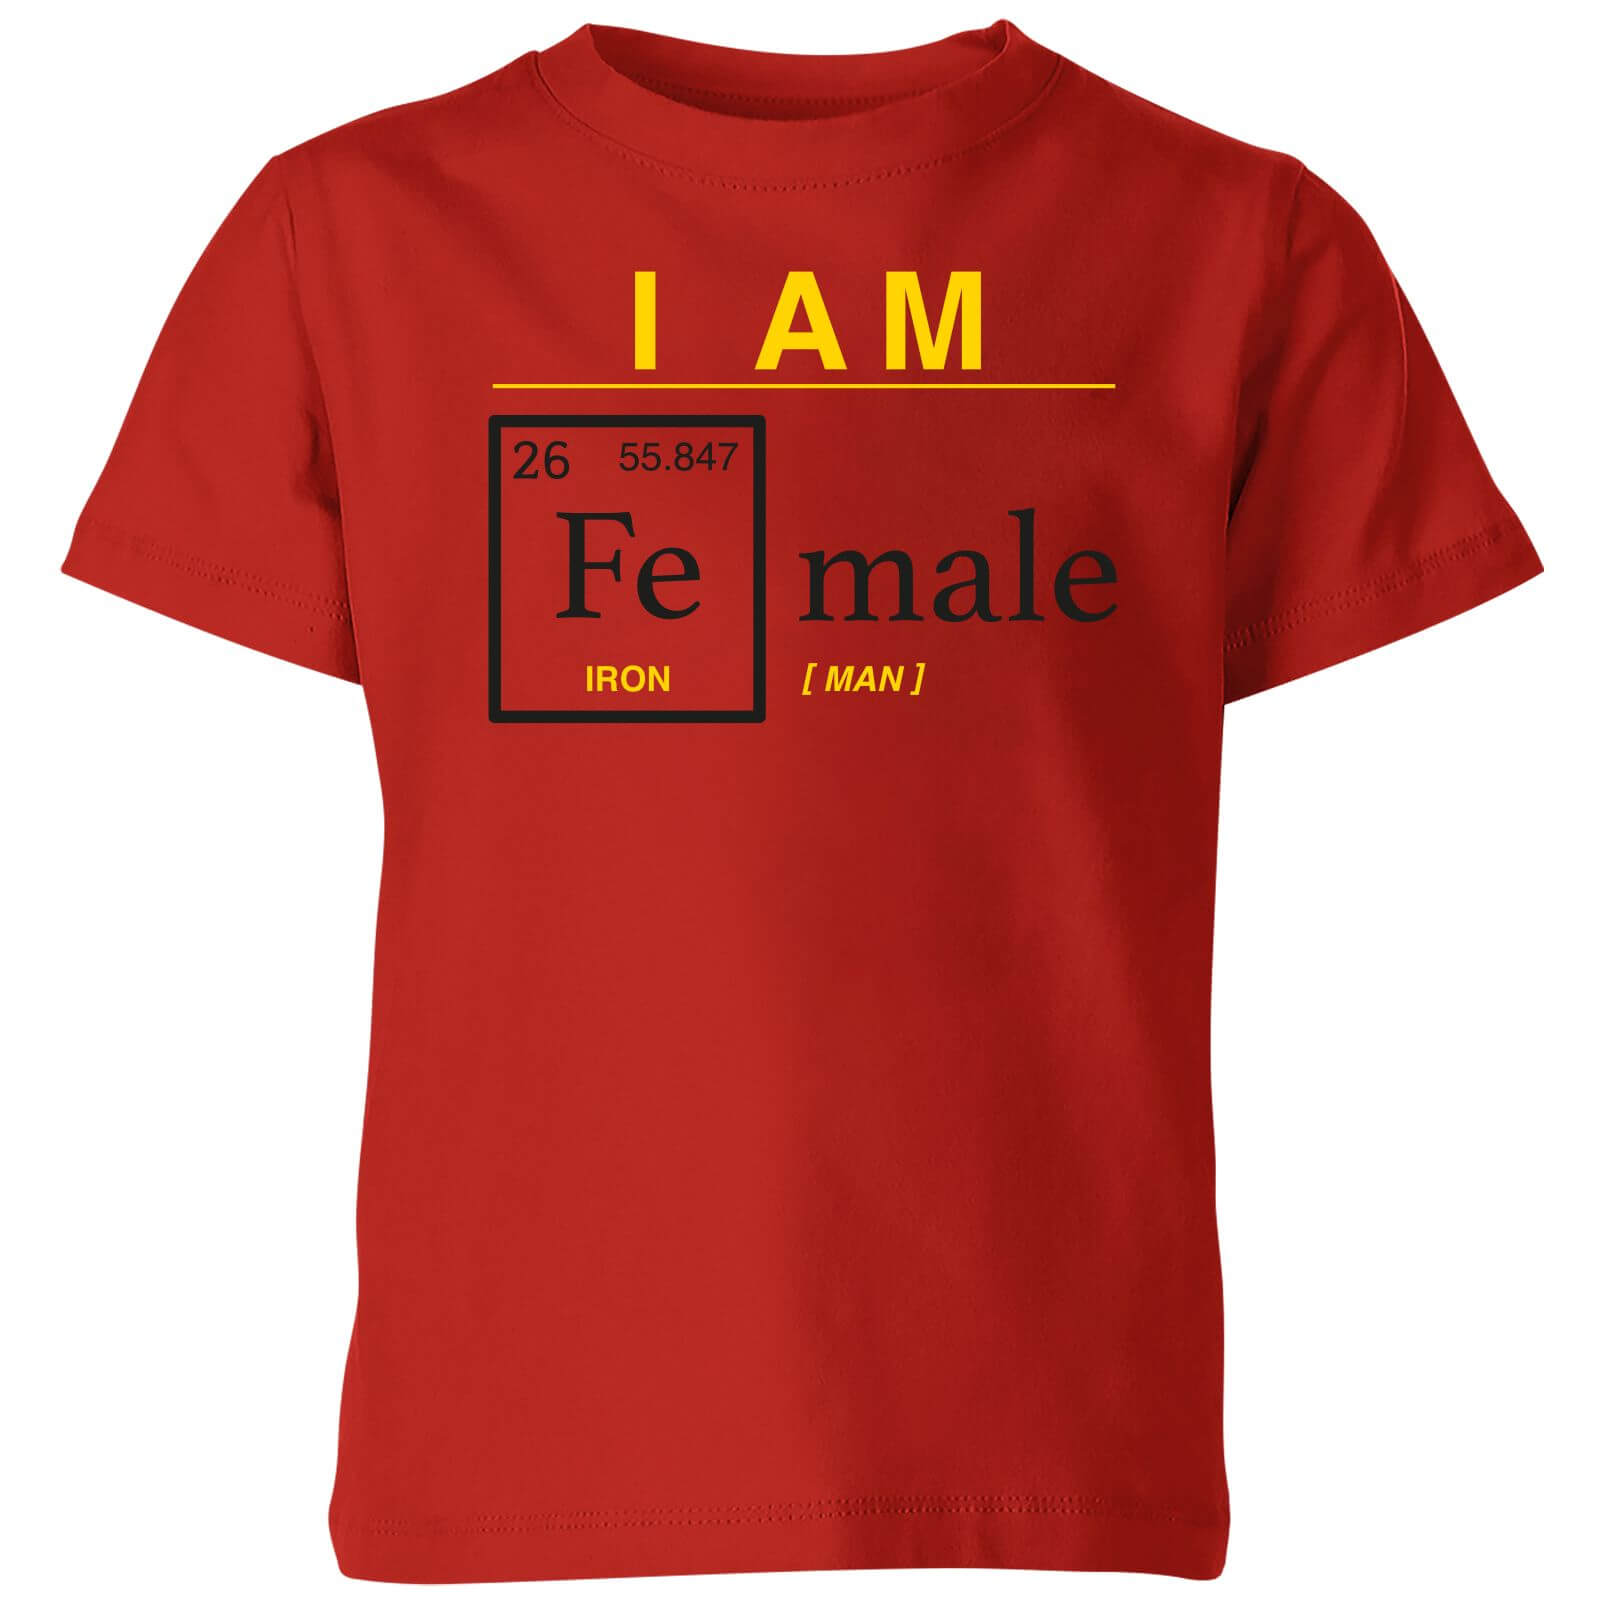 I Am Fe Male Kids' T-Shirt - Red - 9-10 Years - Red